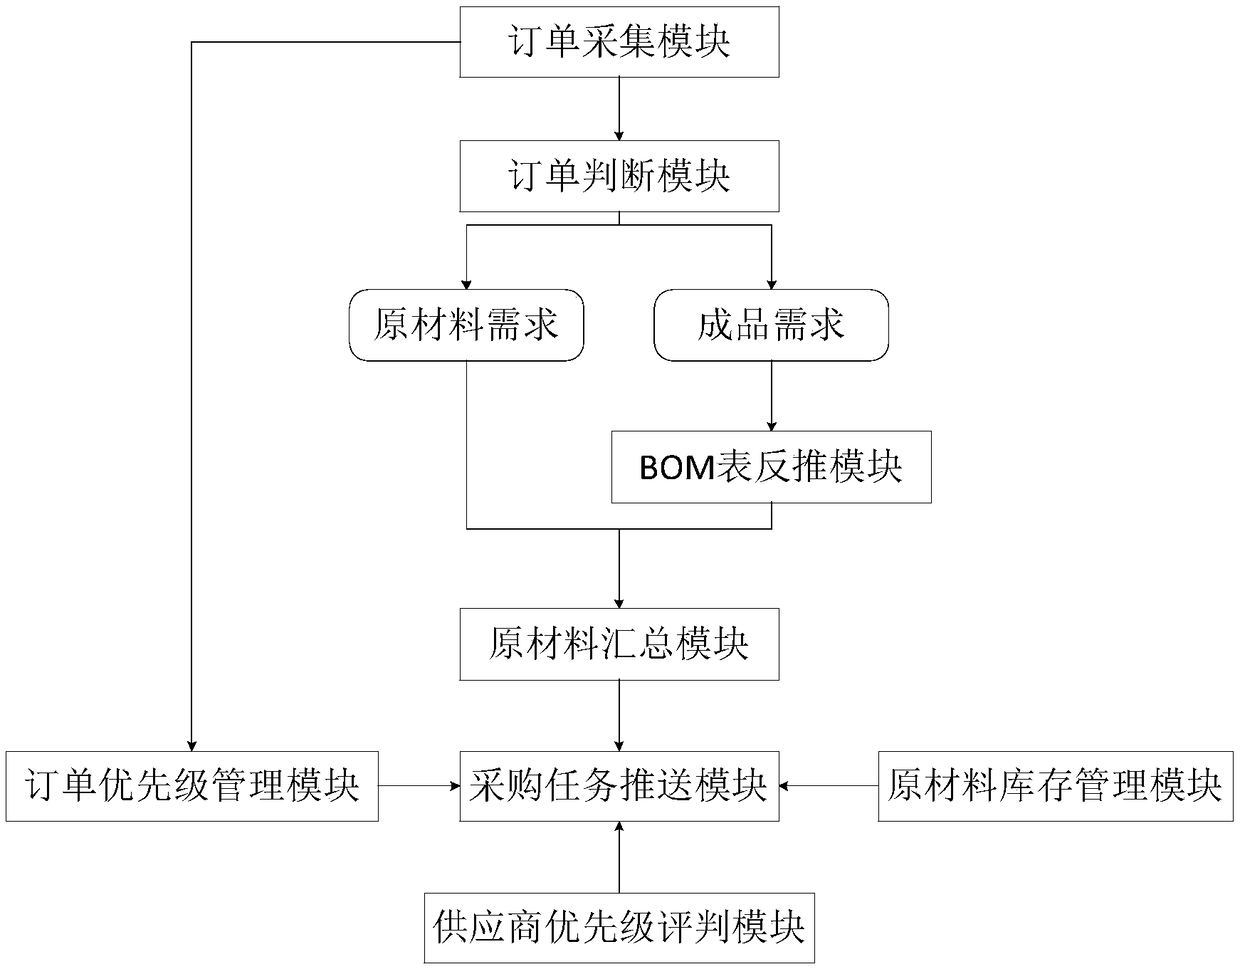 Raw material purchasing system for food processing